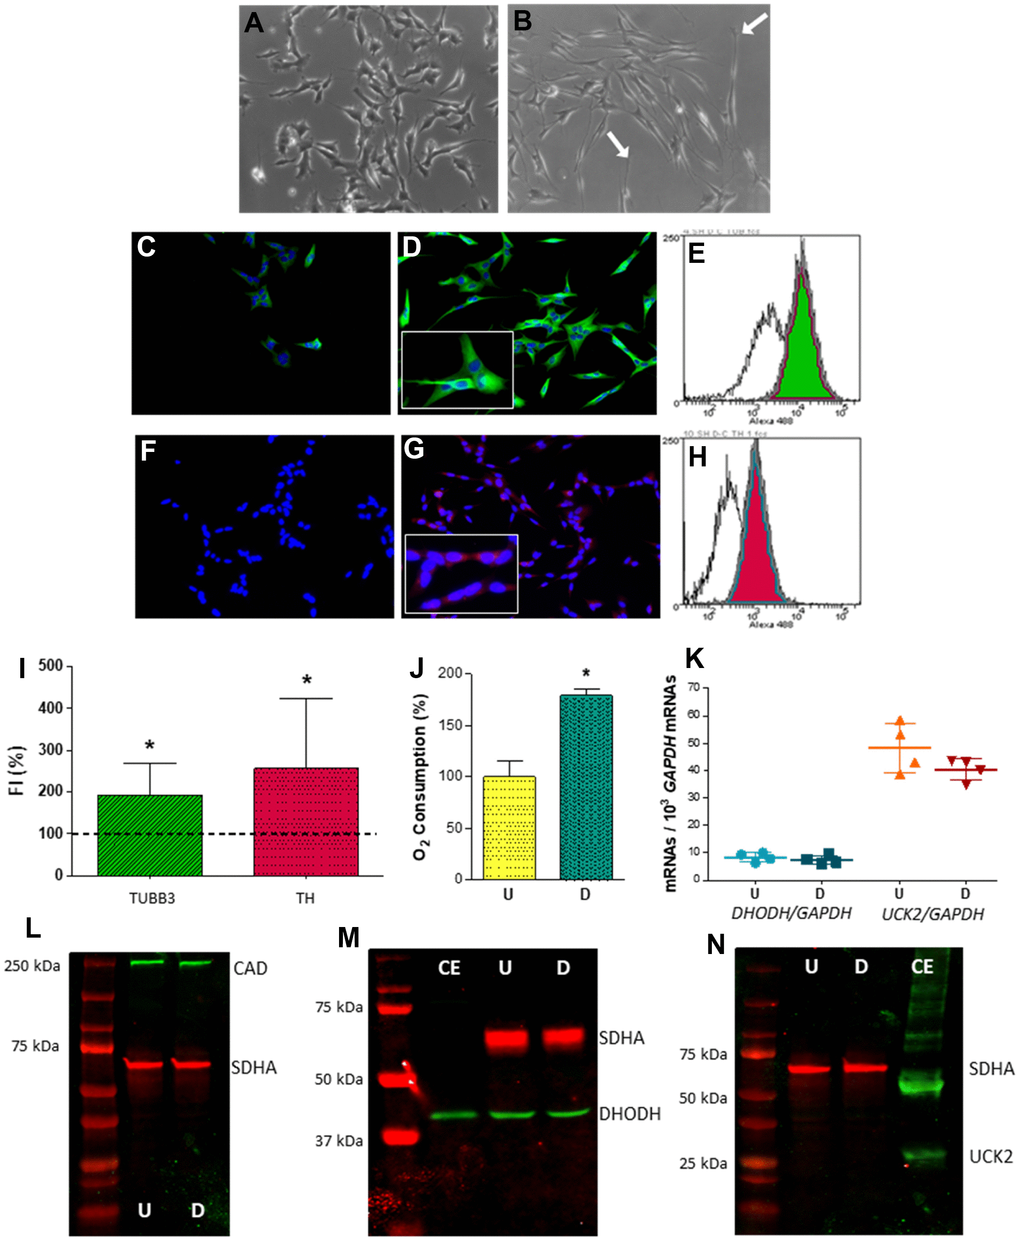 Expression of selected genes from pyrimidine nucleotide synthesis pathways in human neuroblastoma SH-SY5Y cells. (A, B) Representative optic microscopy images of (A) undifferentiated and (B) neuron-differentiated SH-SY5Y cells. White arrows point to neurites. (C, D) Representative immunofluorescence microscopy images of anti-TUBB3 stained (C) undifferentiated and (D) neuron-differentiated SH-SY5Y cells. Inset: enlarged figure detail. (E) Representative image of a flow cytometry histogram of anti-TUBB3 stained undifferentiated (white) and neuron-differentiated (green) cells. (F, G) Representative immunofluorescence microscopy images of anti-TH stained (F) undifferentiated and (G) neuron-differentiated SH-SY5Y cells. Inset: enlarged figure detail. (H) Representative image of a flow cytometry histogram of anti-TH stained undifferentiated (white) and neuron-differentiated (red) cells. (I) Graph showing the change of fluorescence intensity (FI) in TUBB3 and TH levels after neuronal differentiation. Dashed line (100 %) represents TUBB3 or TH mean values of undifferentiated cells. Bars indicate mean values and standard deviations in differentiated cells. N = 11. *: p J) Oxygen consumption of (U) undifferentiated and (D) neuron-differentiated cells. N = 3. *: p K) DHODH and UCK2 mRNA levels in (U) undifferentiated and (D) neuron-differentiated cells. Points represent individual samples and horizontal lines indicate mean ± standard deviation values. N = 4. (L–N) Representative images of western blots for (L) CAD (N = 2), (M) DHODH (N = 3) and (N) UCK2 (N = 2) proteins. CE, commercial enzyme; SDHA, succinate dehydrogenase subunit A. 70 μg of cell protein was used in these western blots (L–N).